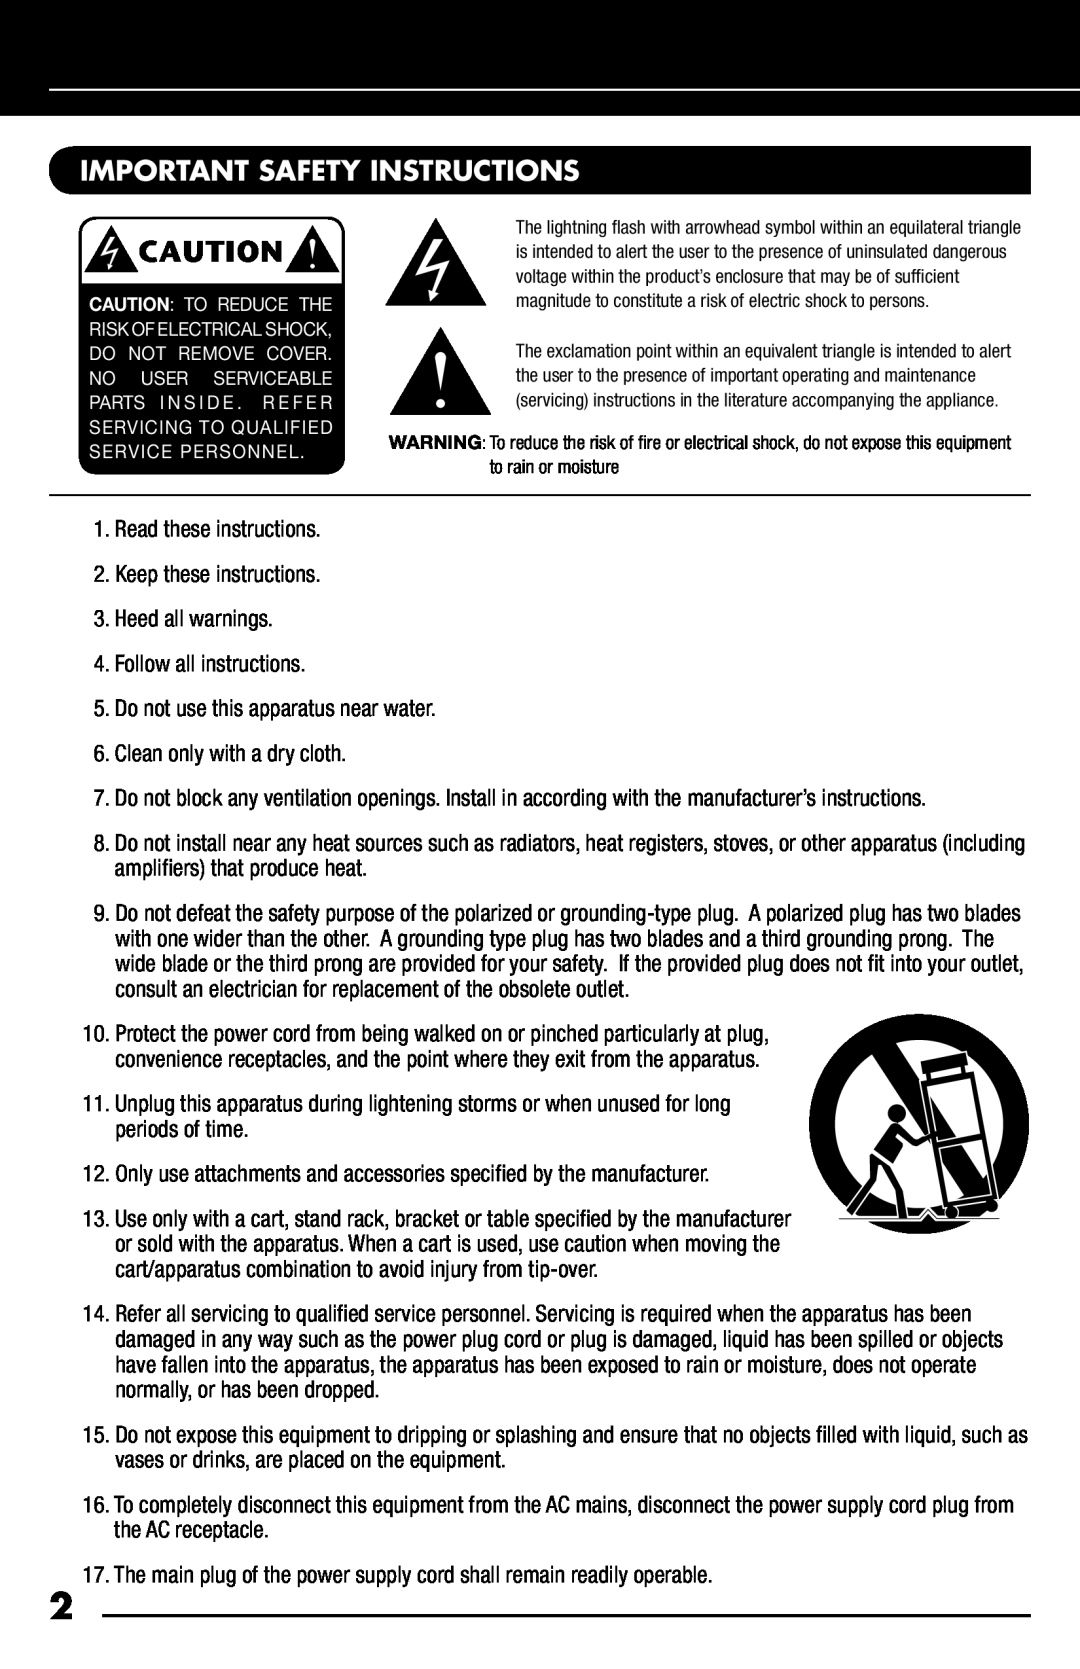 Niles Audio SWA-500M manual Important Safety Instructions 